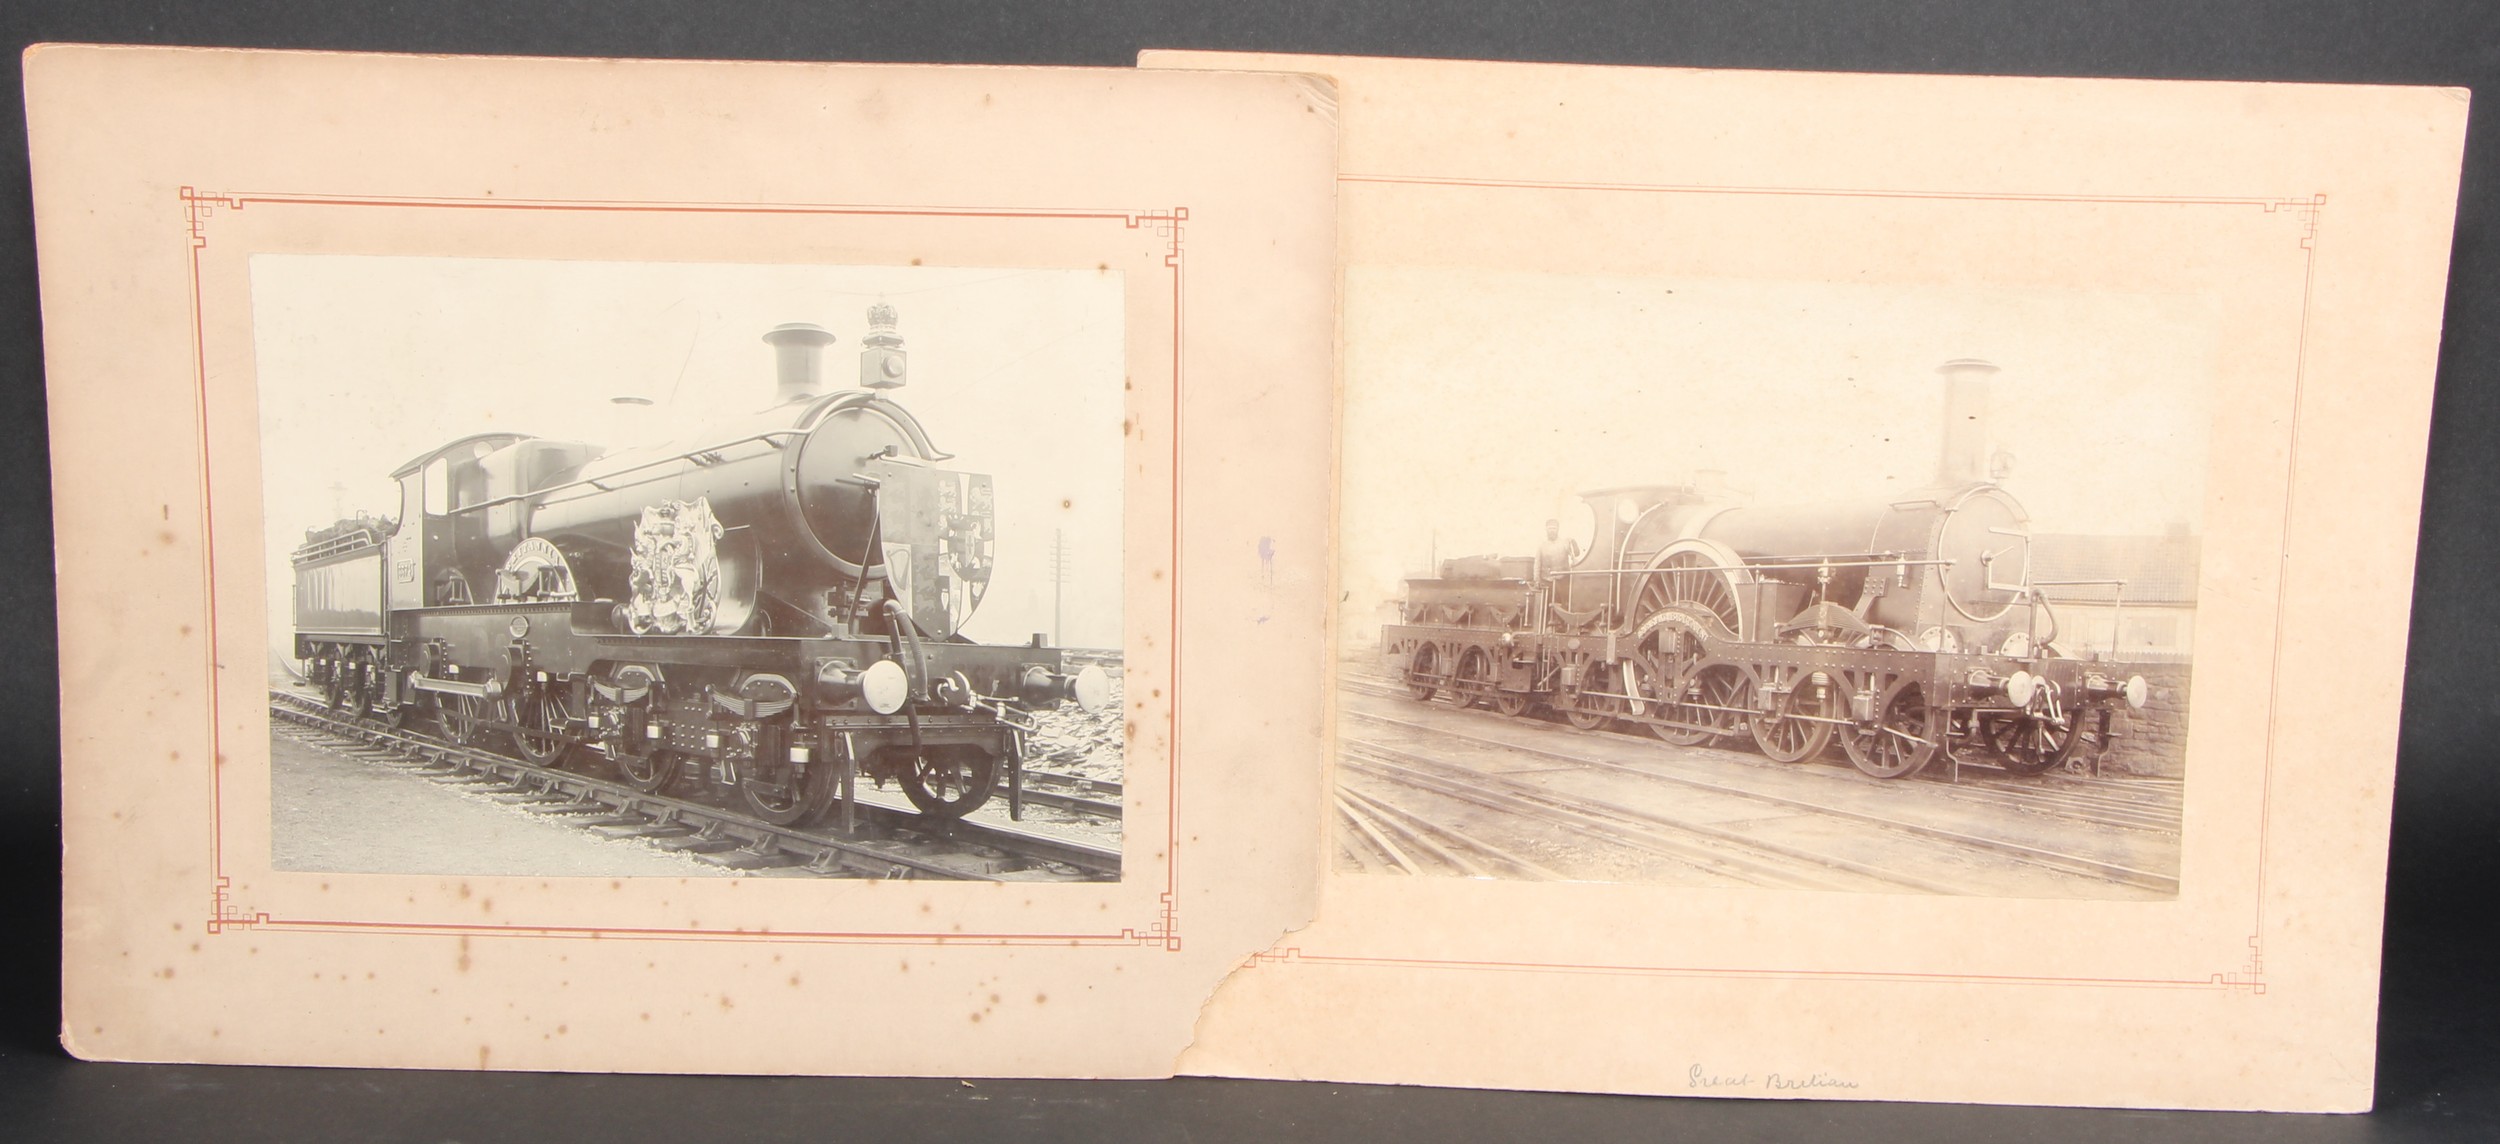 Photography - Railwayana - a collection of 19th century photographs of railway locomotives, many - Image 4 of 8